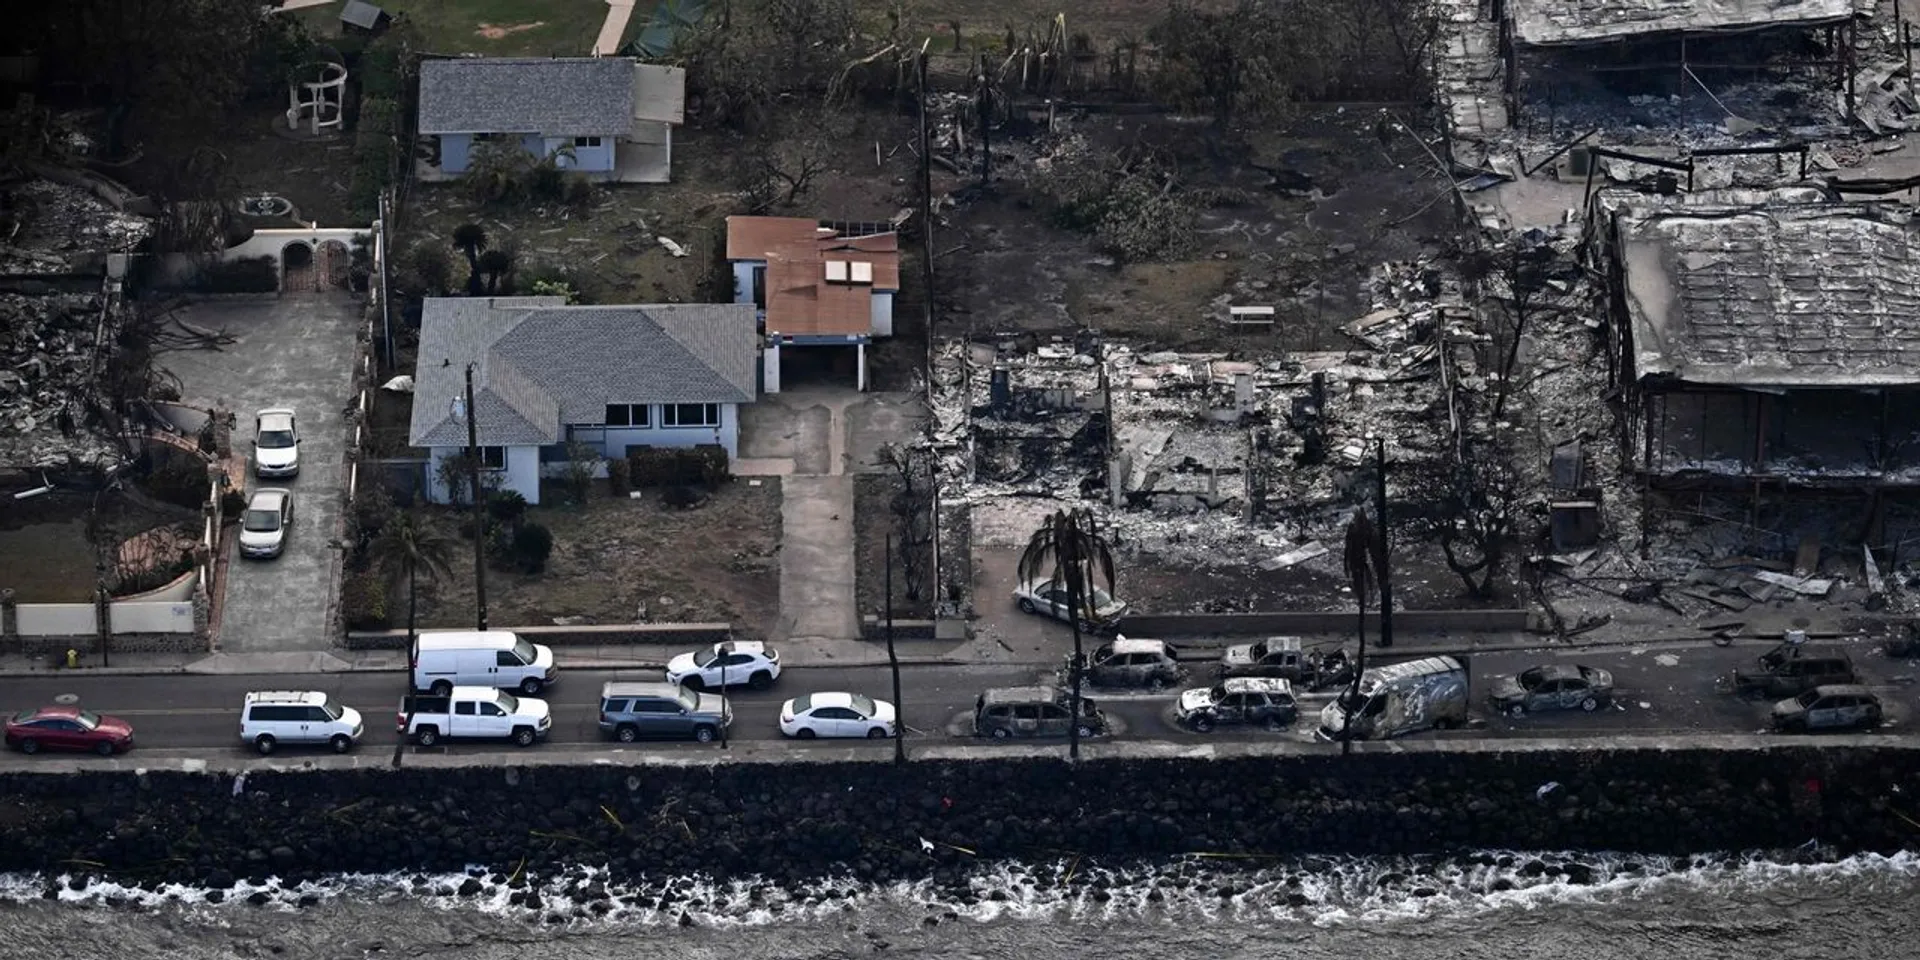 This Is Very Concerning!!  Personal And Business Insurance Is Already Very Expensive!!

Wildfires and Thunderstorms Are Throwing Insurance Market Into Turbulence https://www.wsj.com/articles/wildfires-and-thunderstorms-are-throwing-insurance-market-into-turbulence-2c62ab7b?mod=hp_lead_pos8 - Smaller but more frequent catastrophes are a primary driver of changing rates and coverage 

#Insurance  #Coverage  #Wildfires  